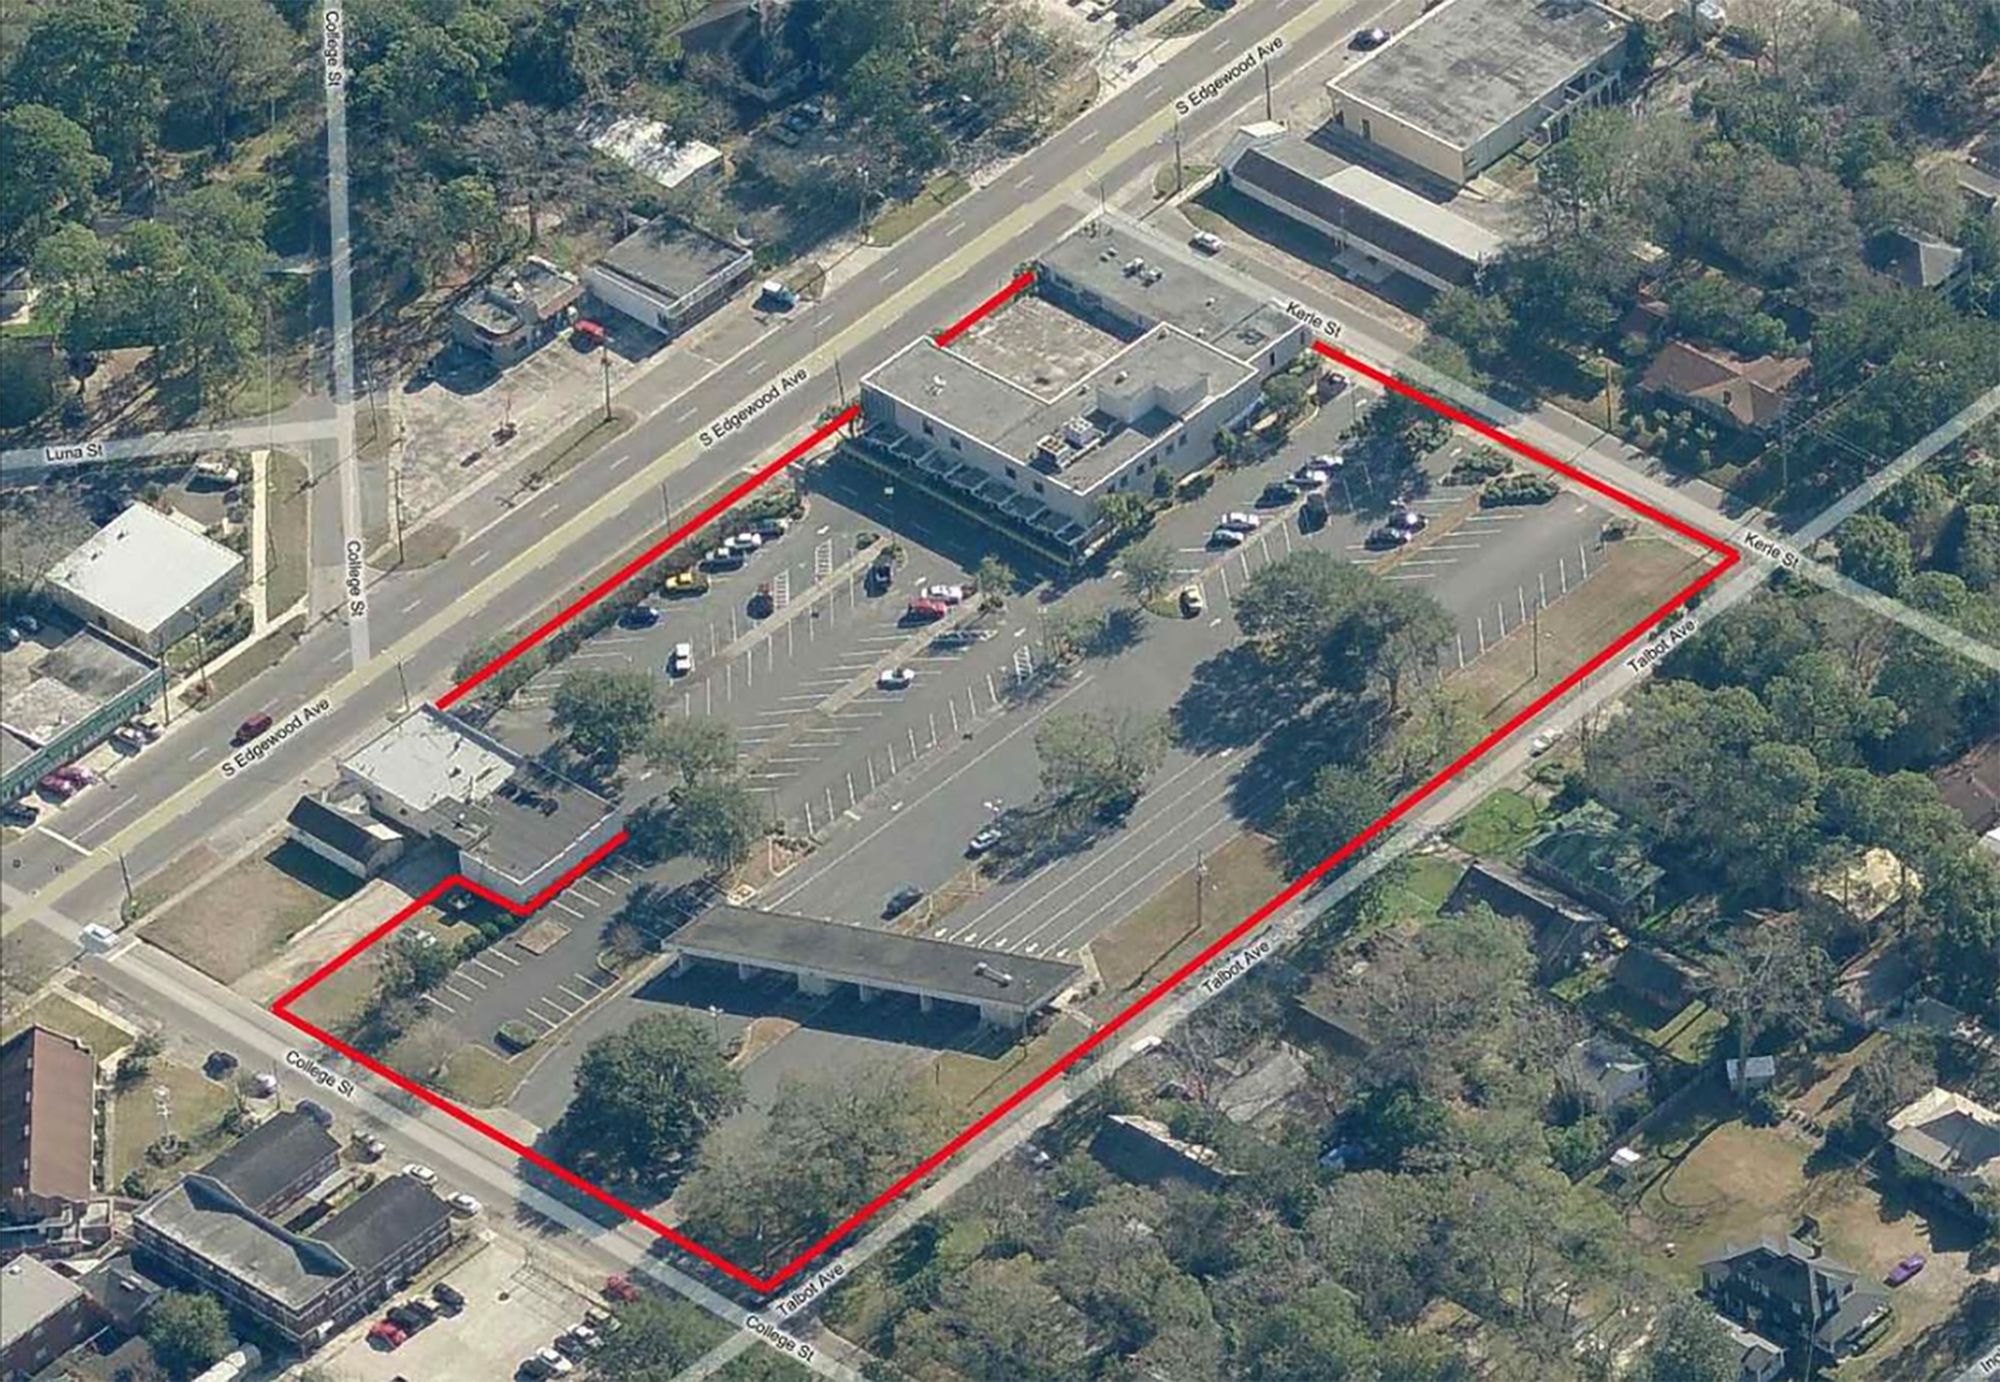 Vestcor paid $2.1 million for the 3.69-acre Edgewood Avenue site at Talbot Avenue and Kerle and College streets.